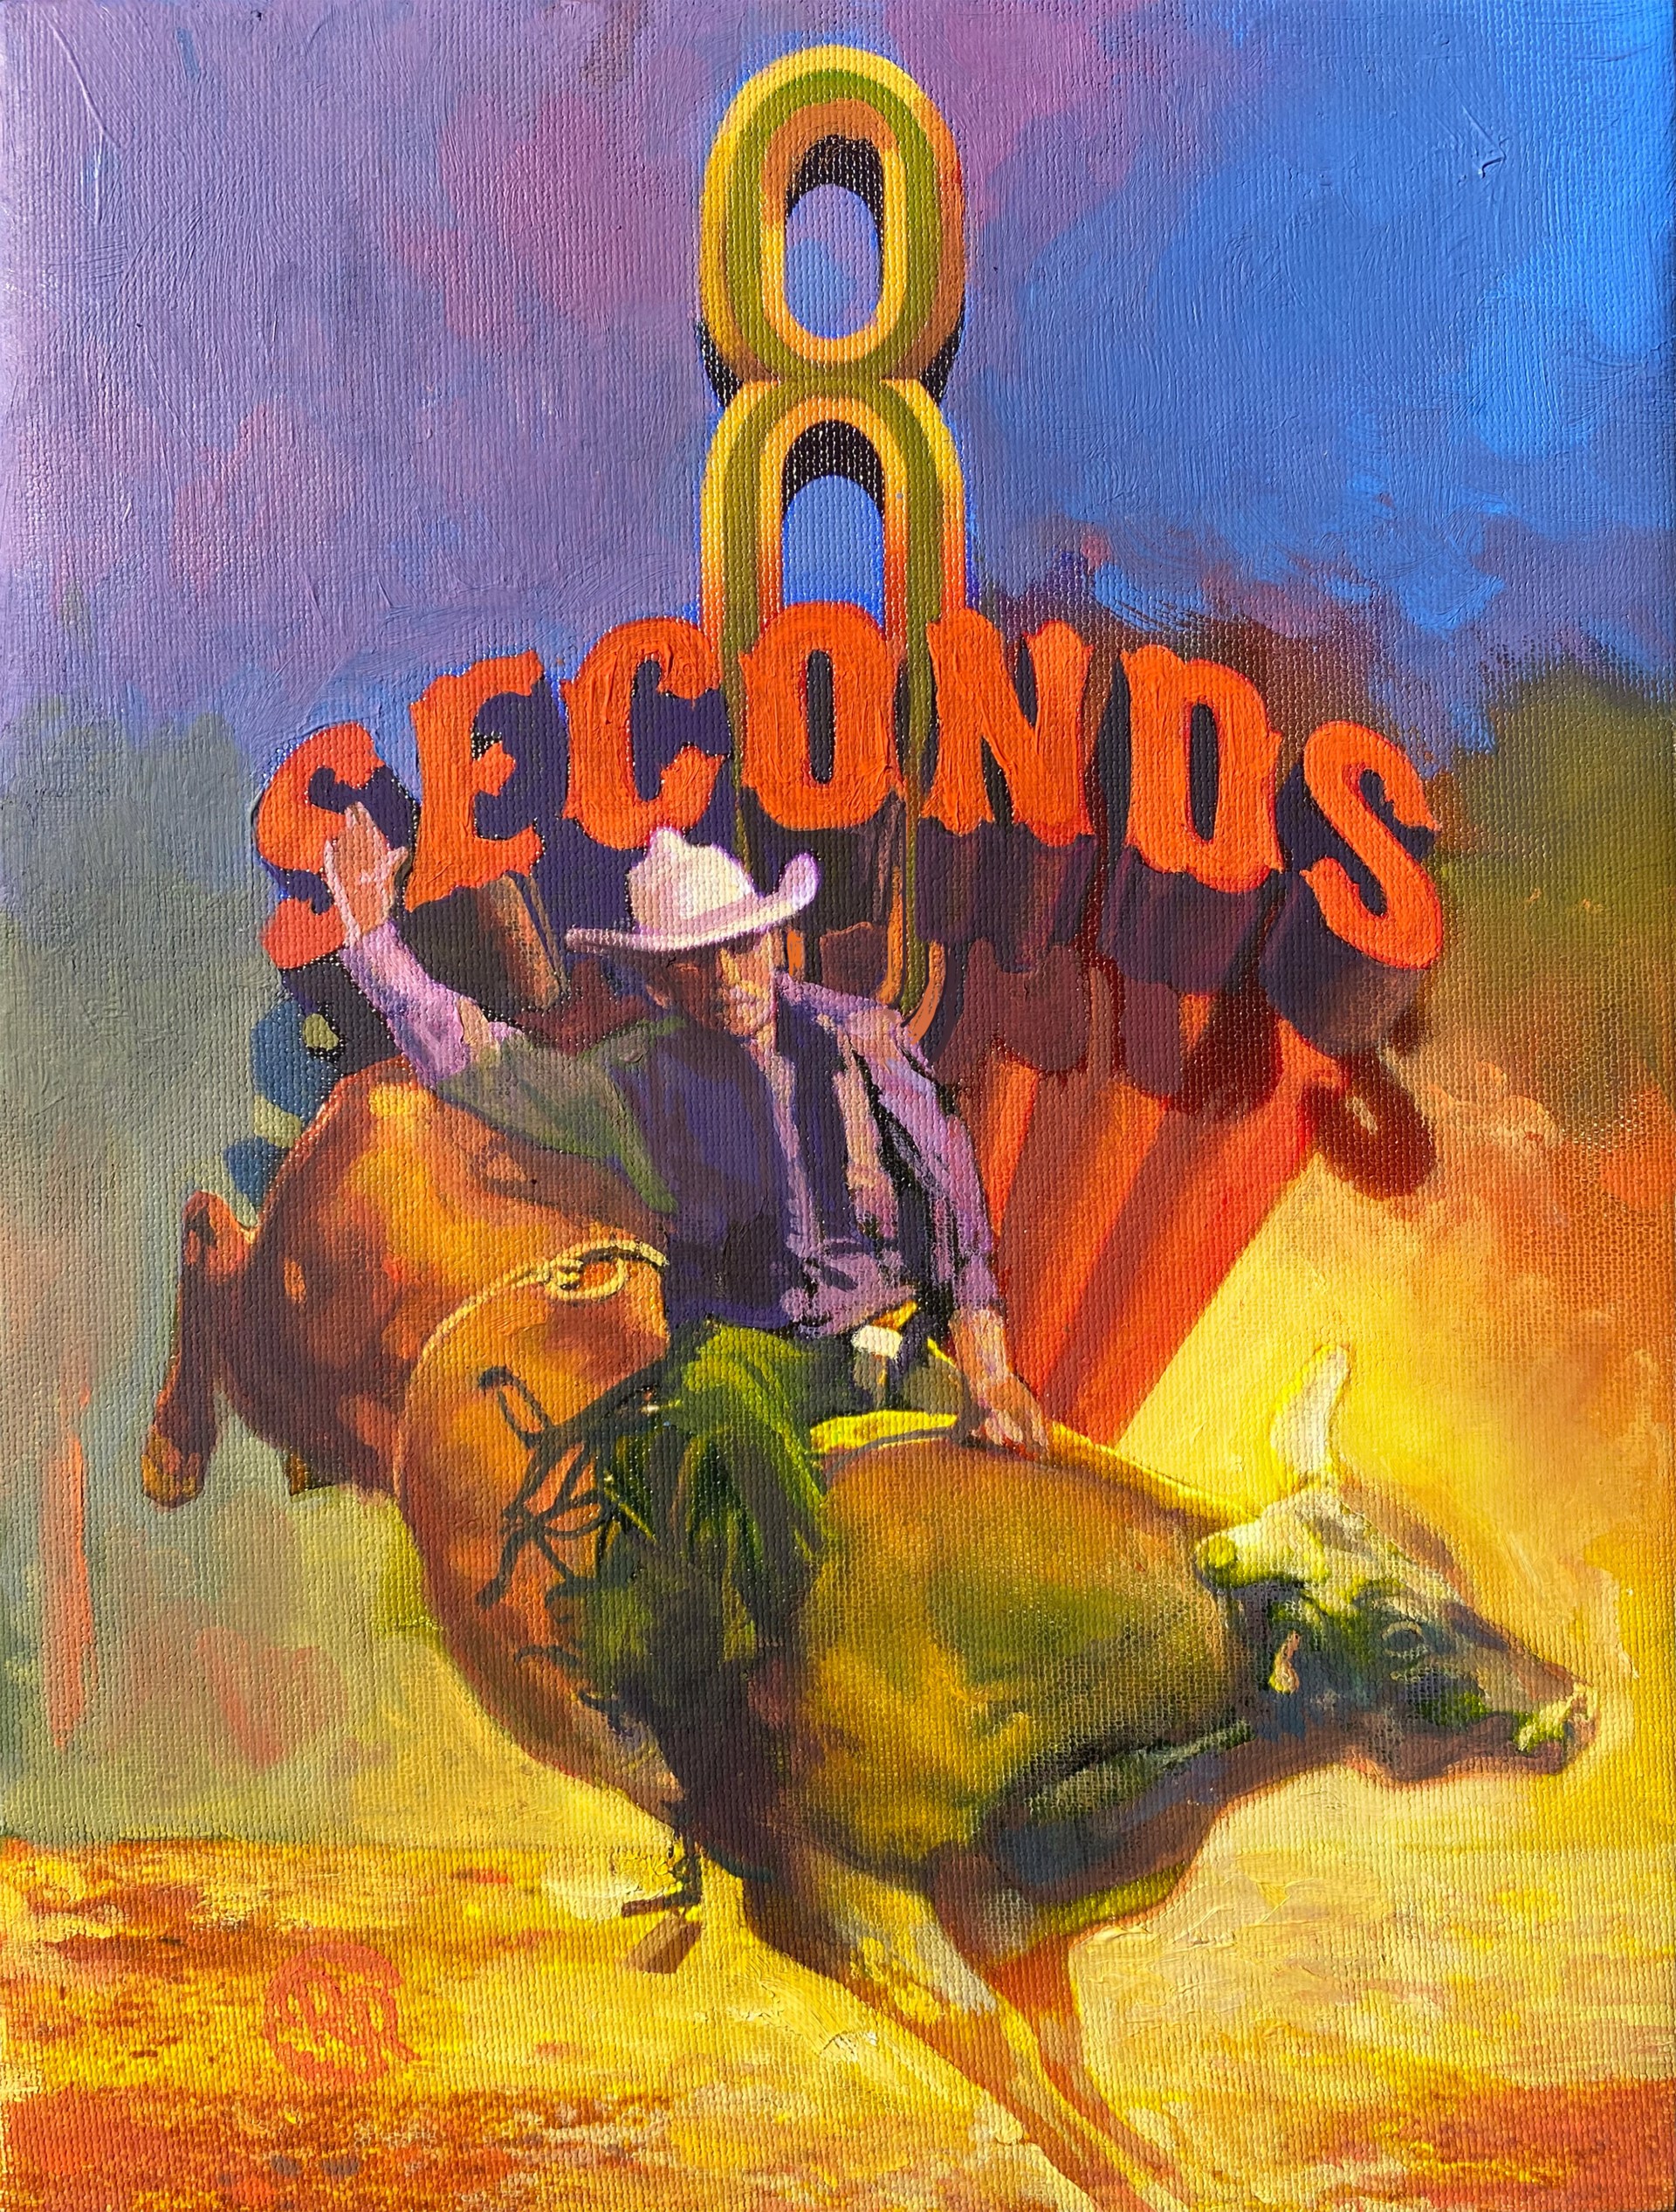 8 Seconds of Hell by Robert Rodriguez